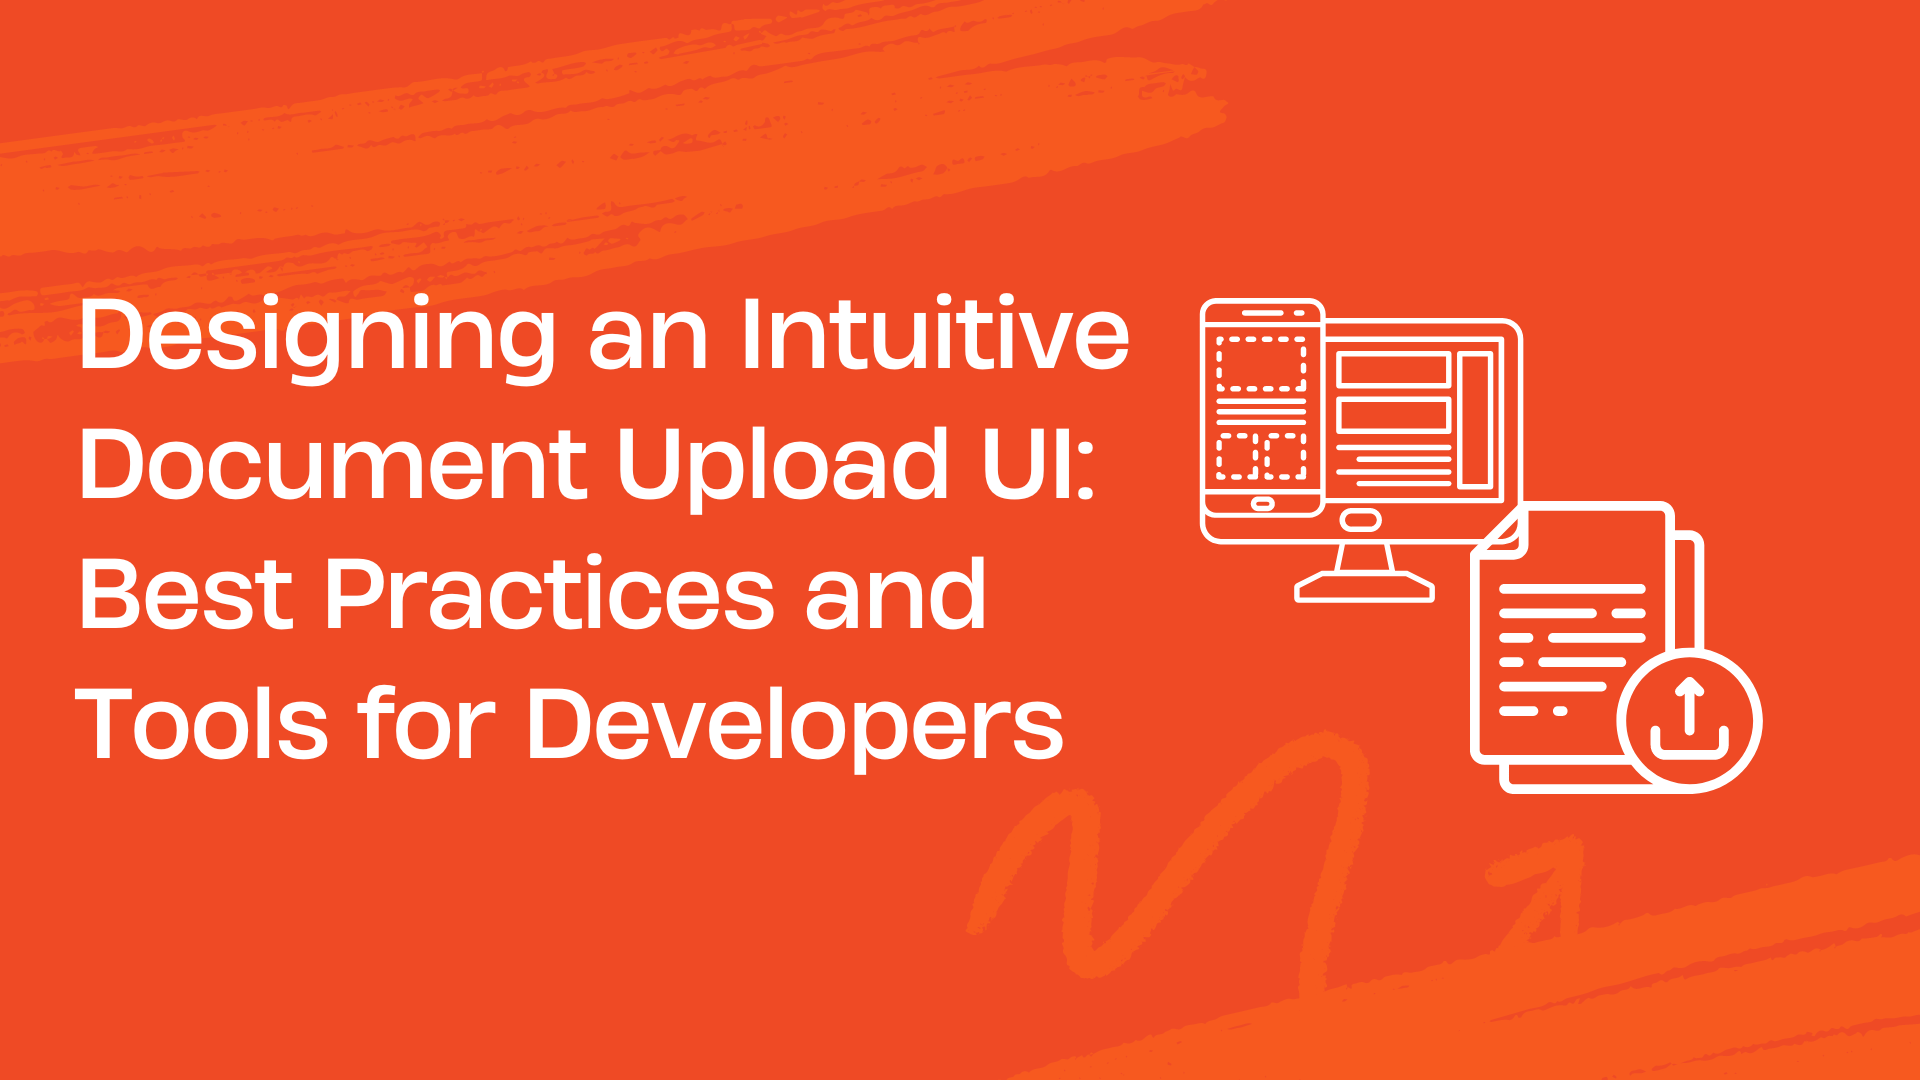 Designing an Intuitive Document Upload UI Best Practices and Tools for Developers